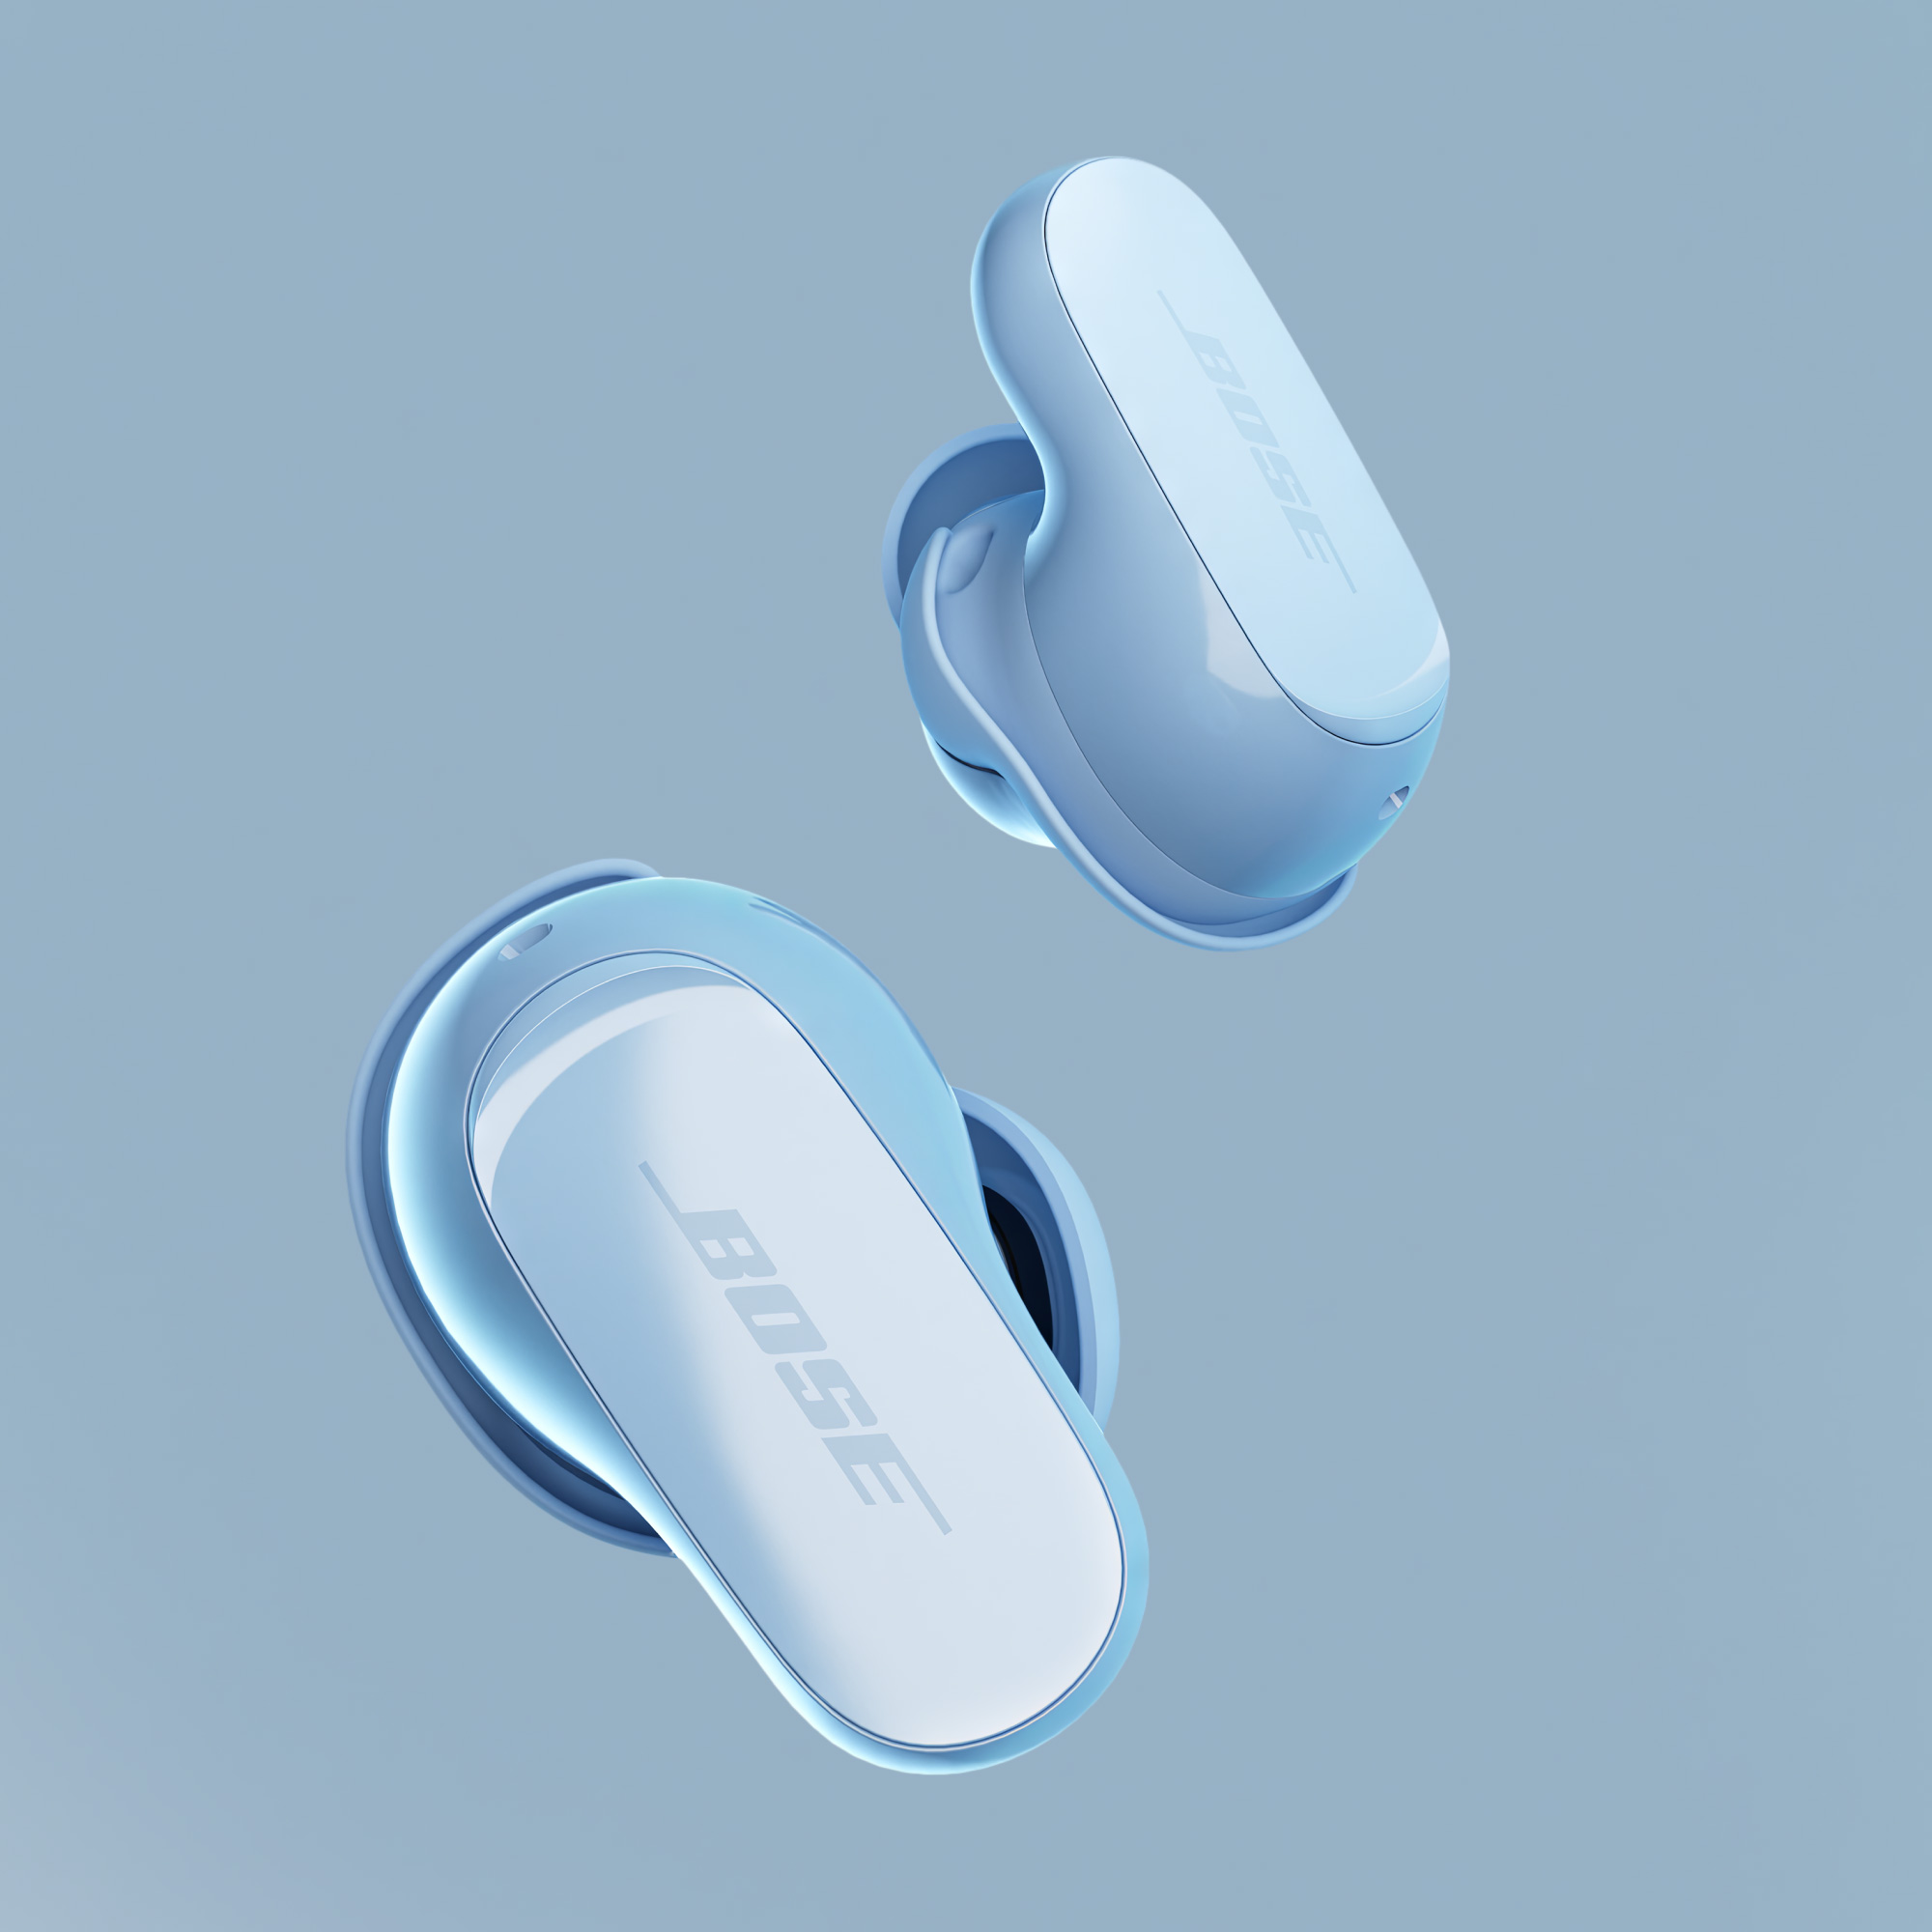 Bose QuietComfort Ultra Wireless Earbuds, Noise Cancelling Bluetooth Headphones, Moonstone Blue - image 2 of 8